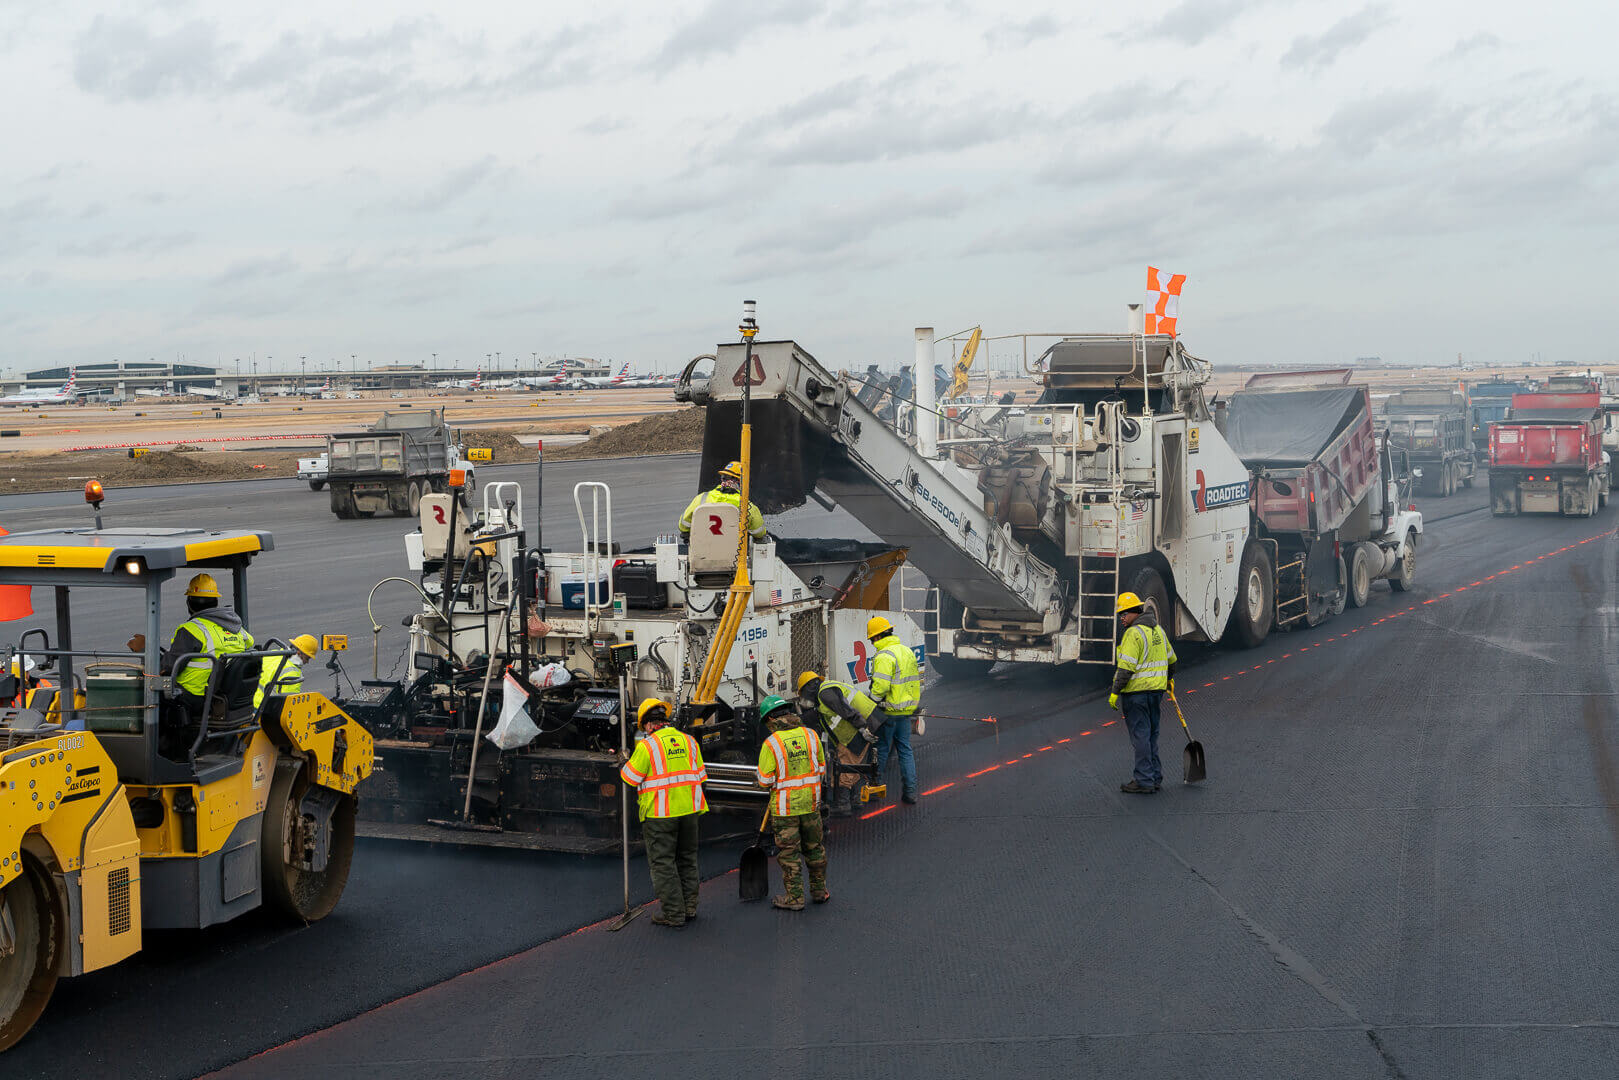 Roadtec RP-190 Highway Class Paver working with a Roadtec SB-2500 Shuttle Buggy Material Transfer Vehicle at DFW airport